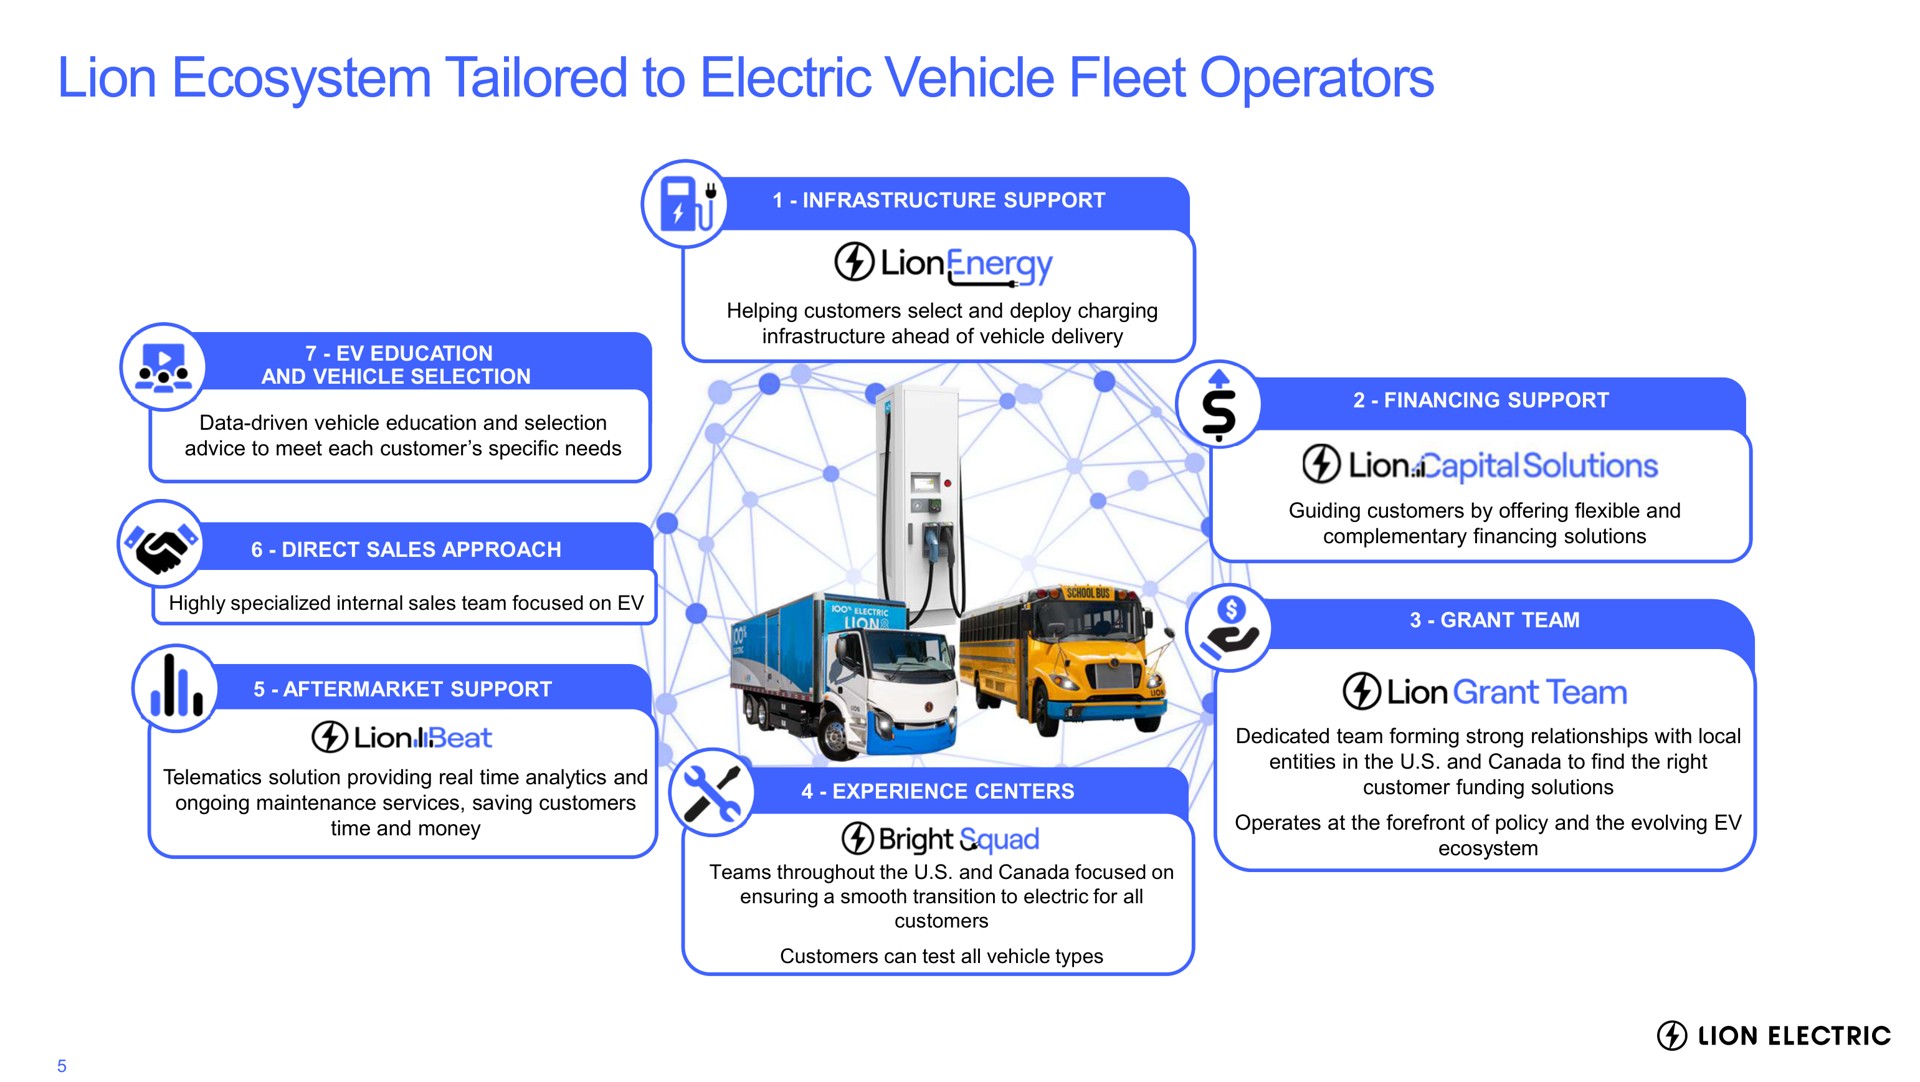 lion ecosystem tailored to electric vehicle fleet operators pea lat bright squad solutions grant team | Lion Electric